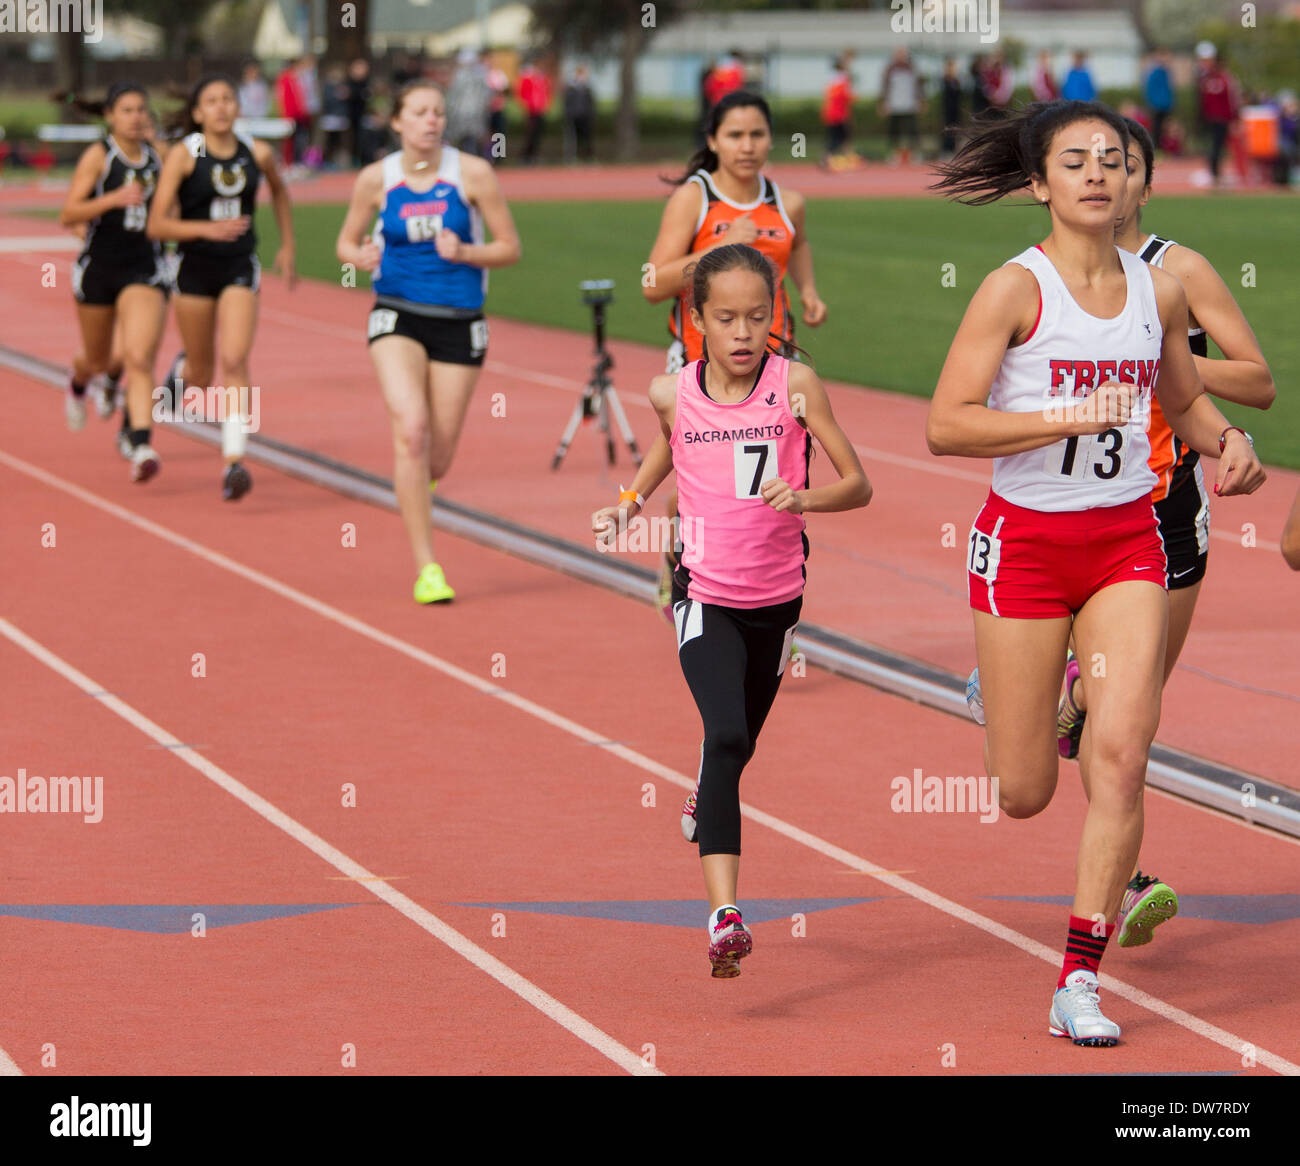 Turlock, CA, USA. 1st Mar, 2014. 11 yr old Isabella Fauria(7) of Sacramento Ca runs the 1500m run during the Kim Duyst Invitational at CSU Stanislaus on March 1st 2014. Competing against college athletes she finished 12 out of 46 runners in the event with a time of 4:59.09. Fauria also ran the 800m run in 2:29.54 and finished 3rd in her heat and finished 26th out of 46 runners. Credit:  Marty Bicek/ZUMAPRESS.com/Alamy Live News Stock Photo